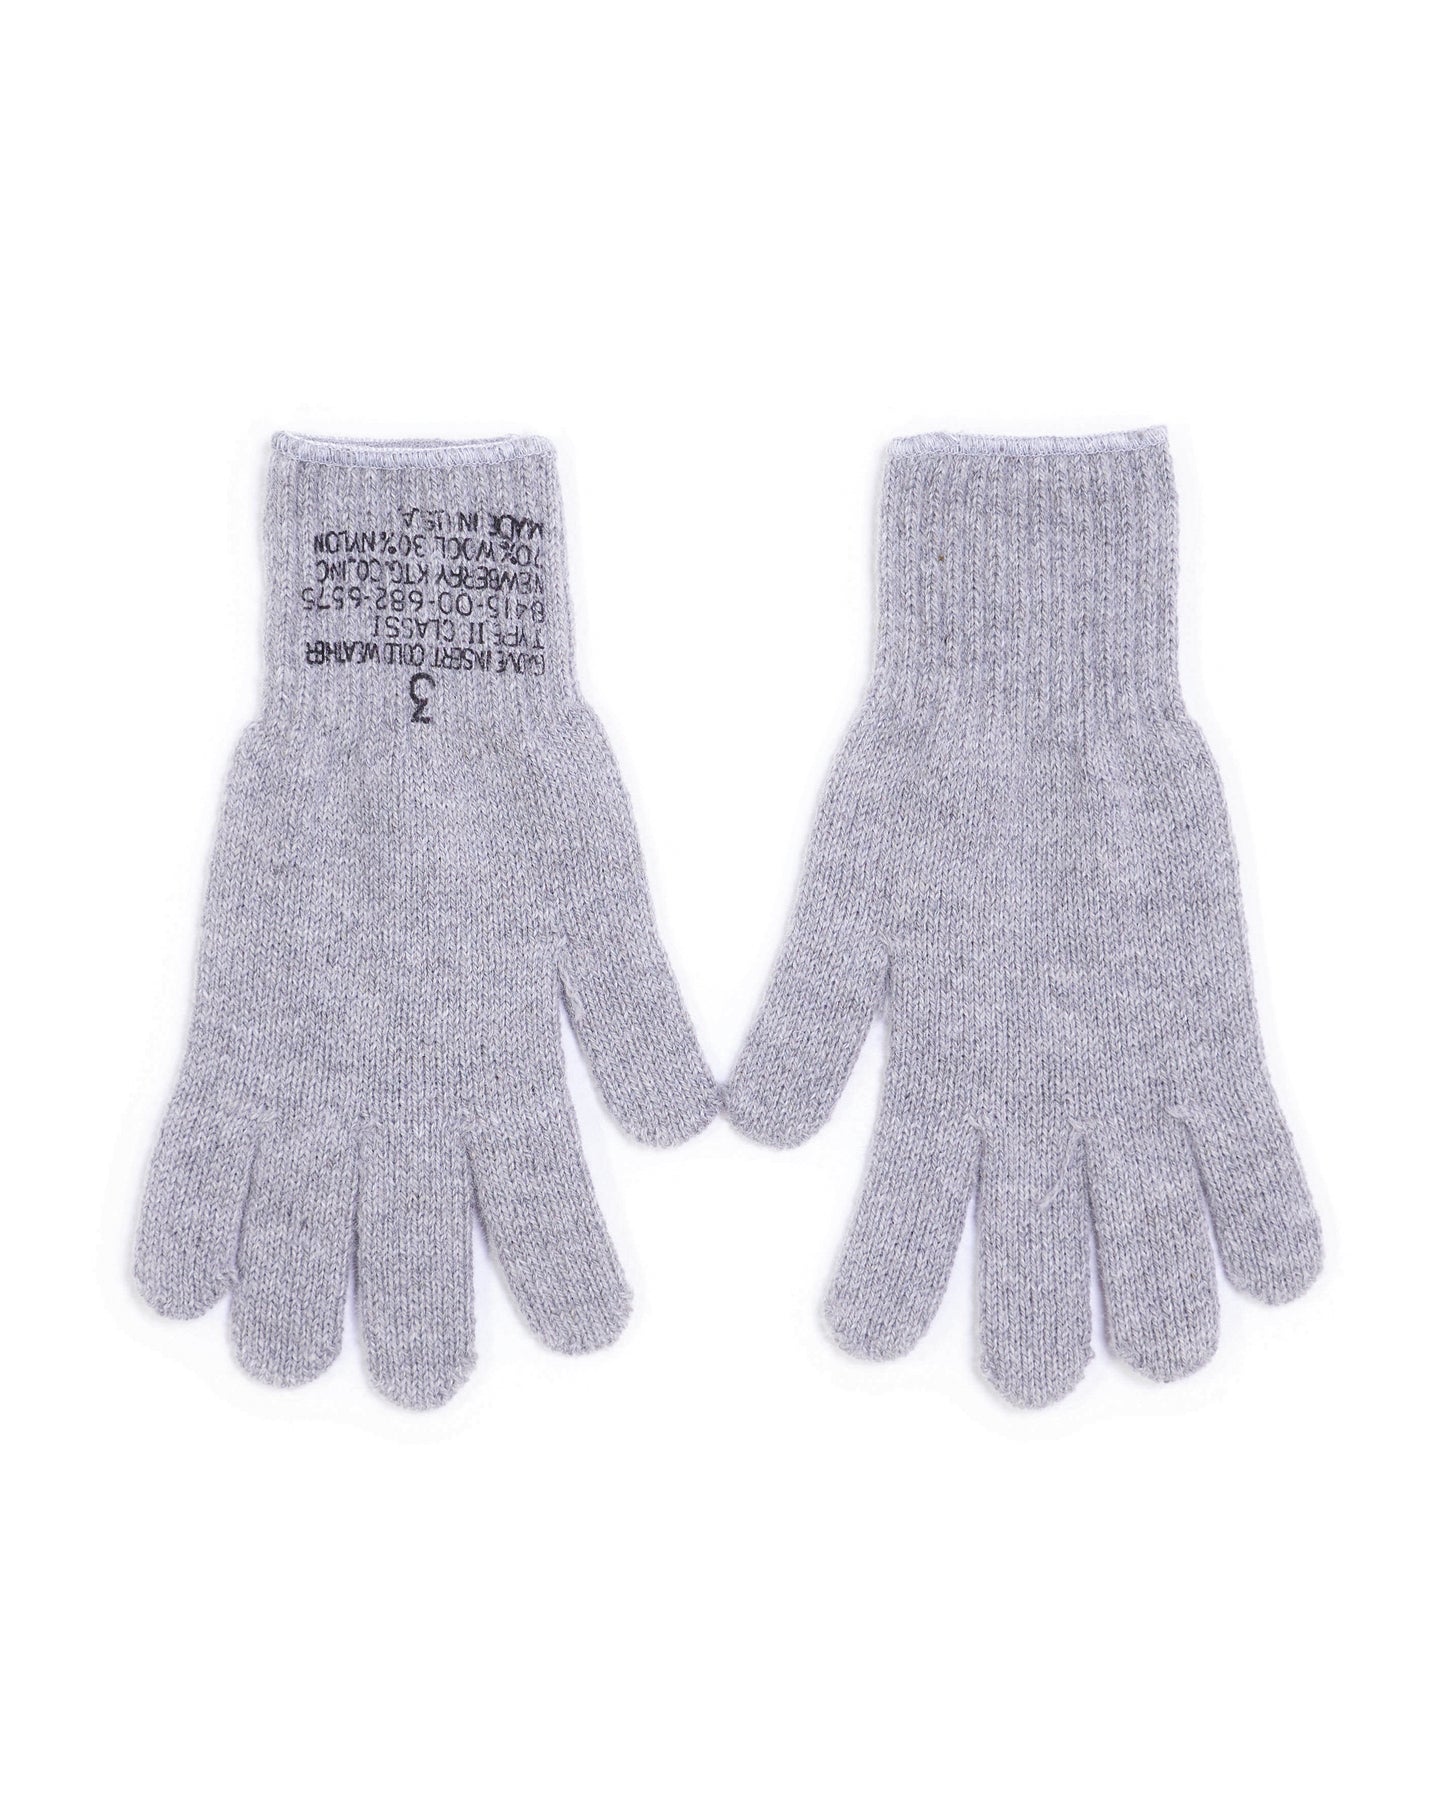 Wool Military Gloves - Grey